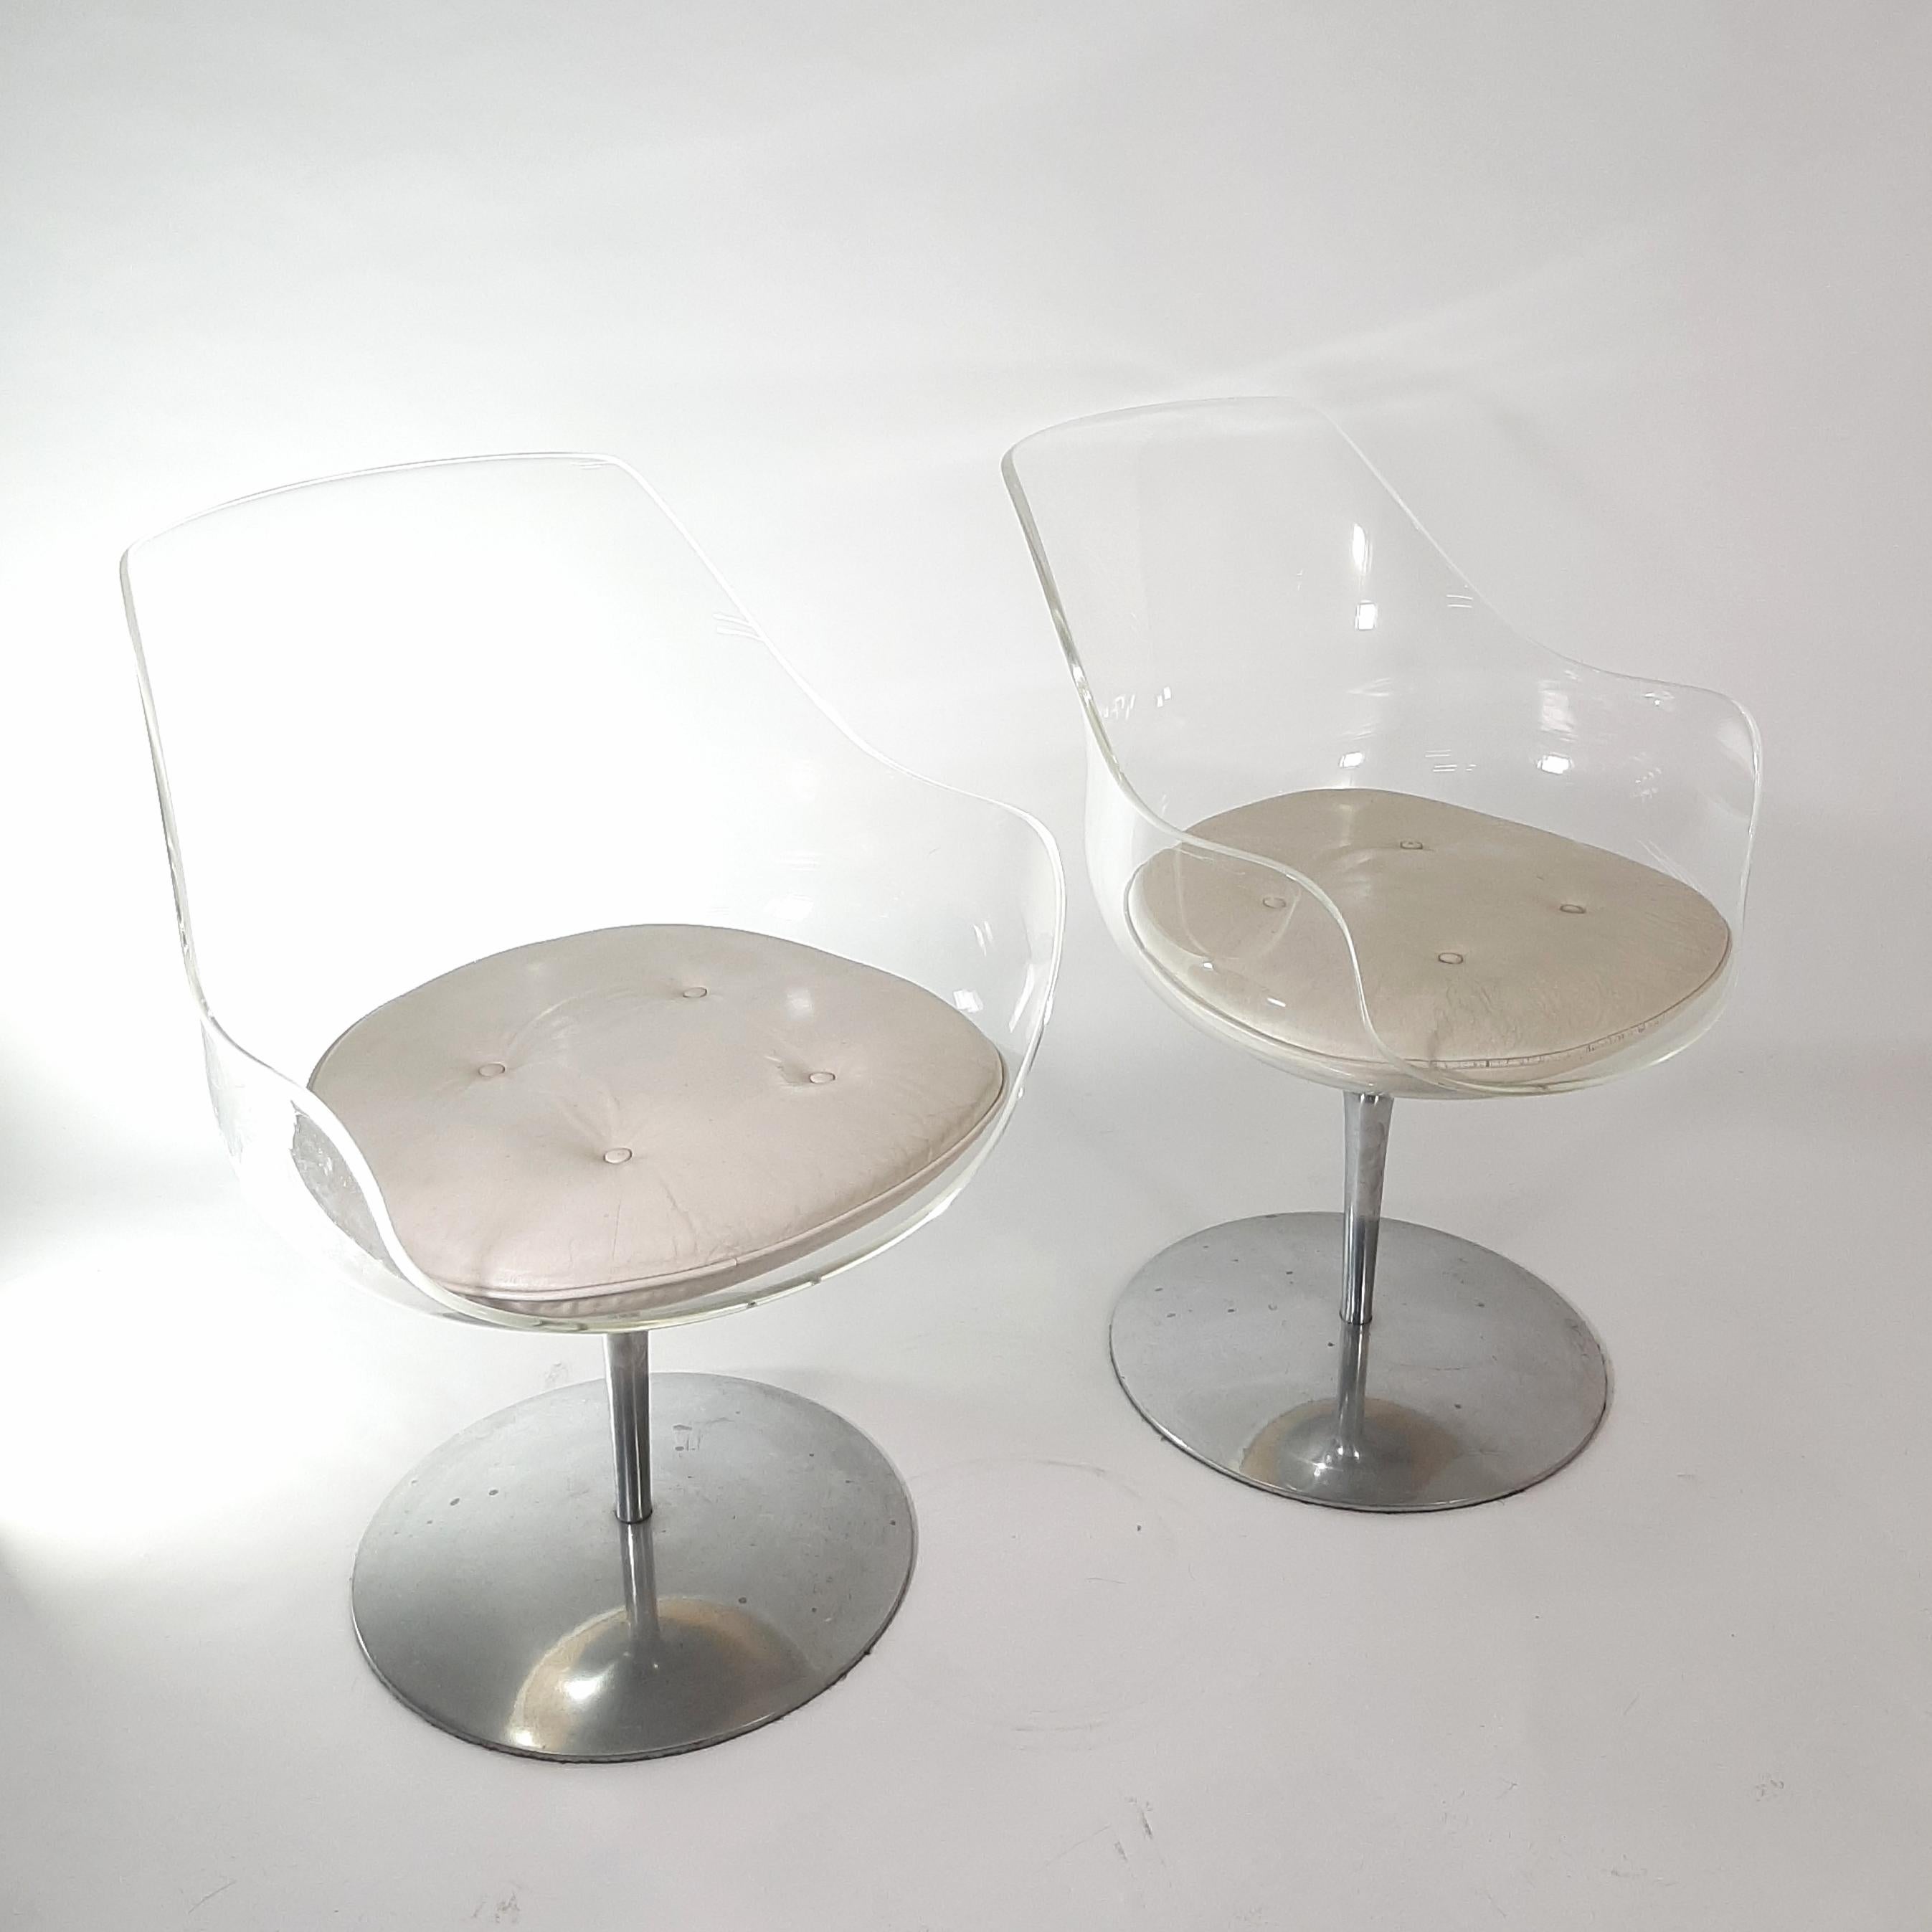 Set of two lucite Champagne chairs designed by Erwine & Estelle Laverne, ca. 1960
Edited by Formes Nouvelles.

With it’s transparent lucite seat shell and Aluminium base the Champagne chair offers a highly esthetic elegance and comfort. The